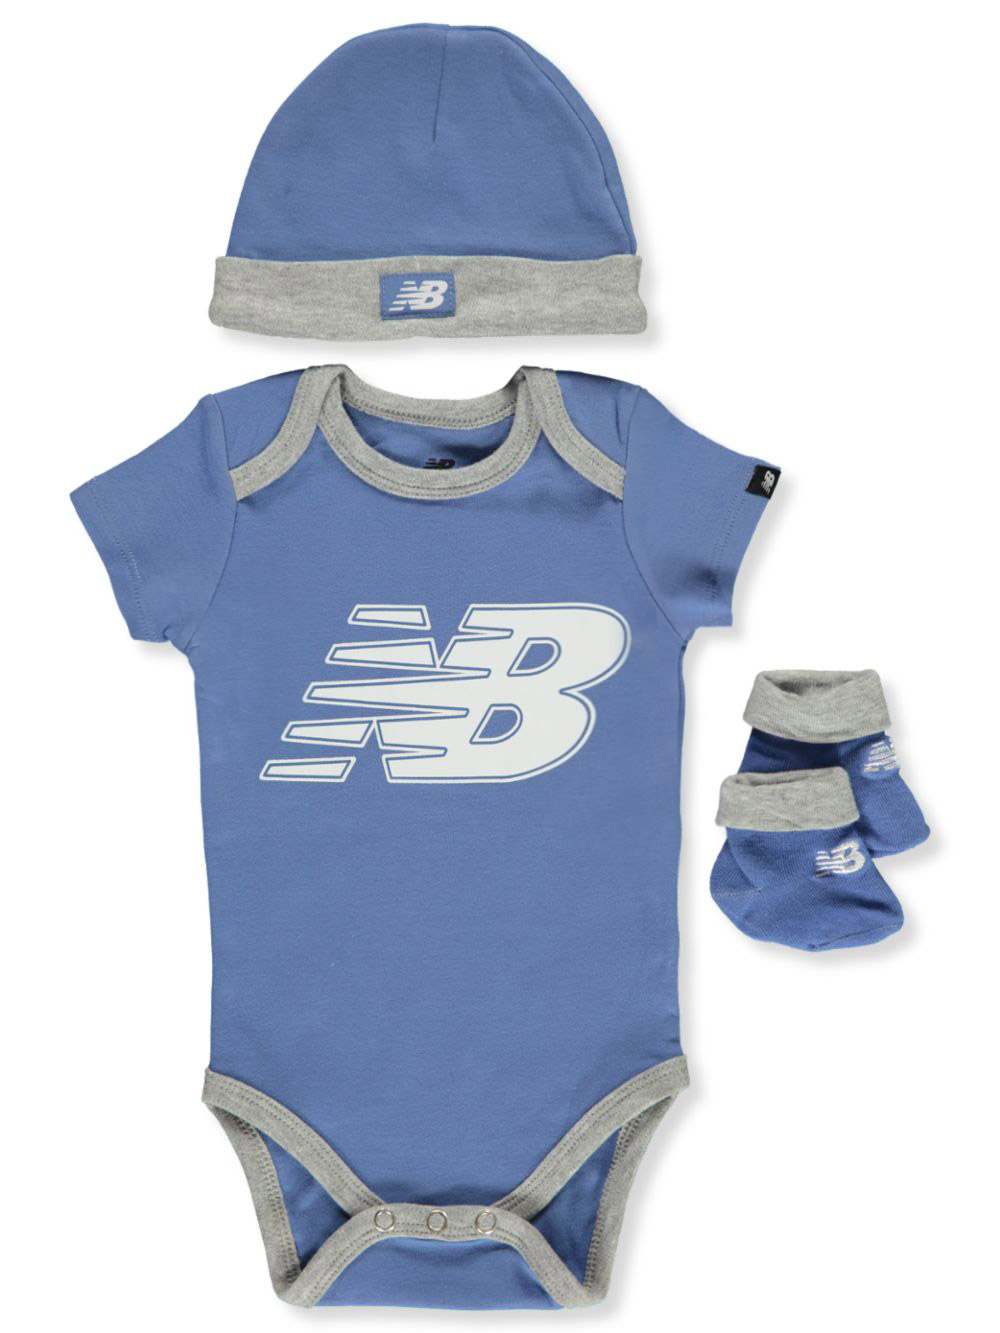 Boys Blue and Multicolor Gift Sets